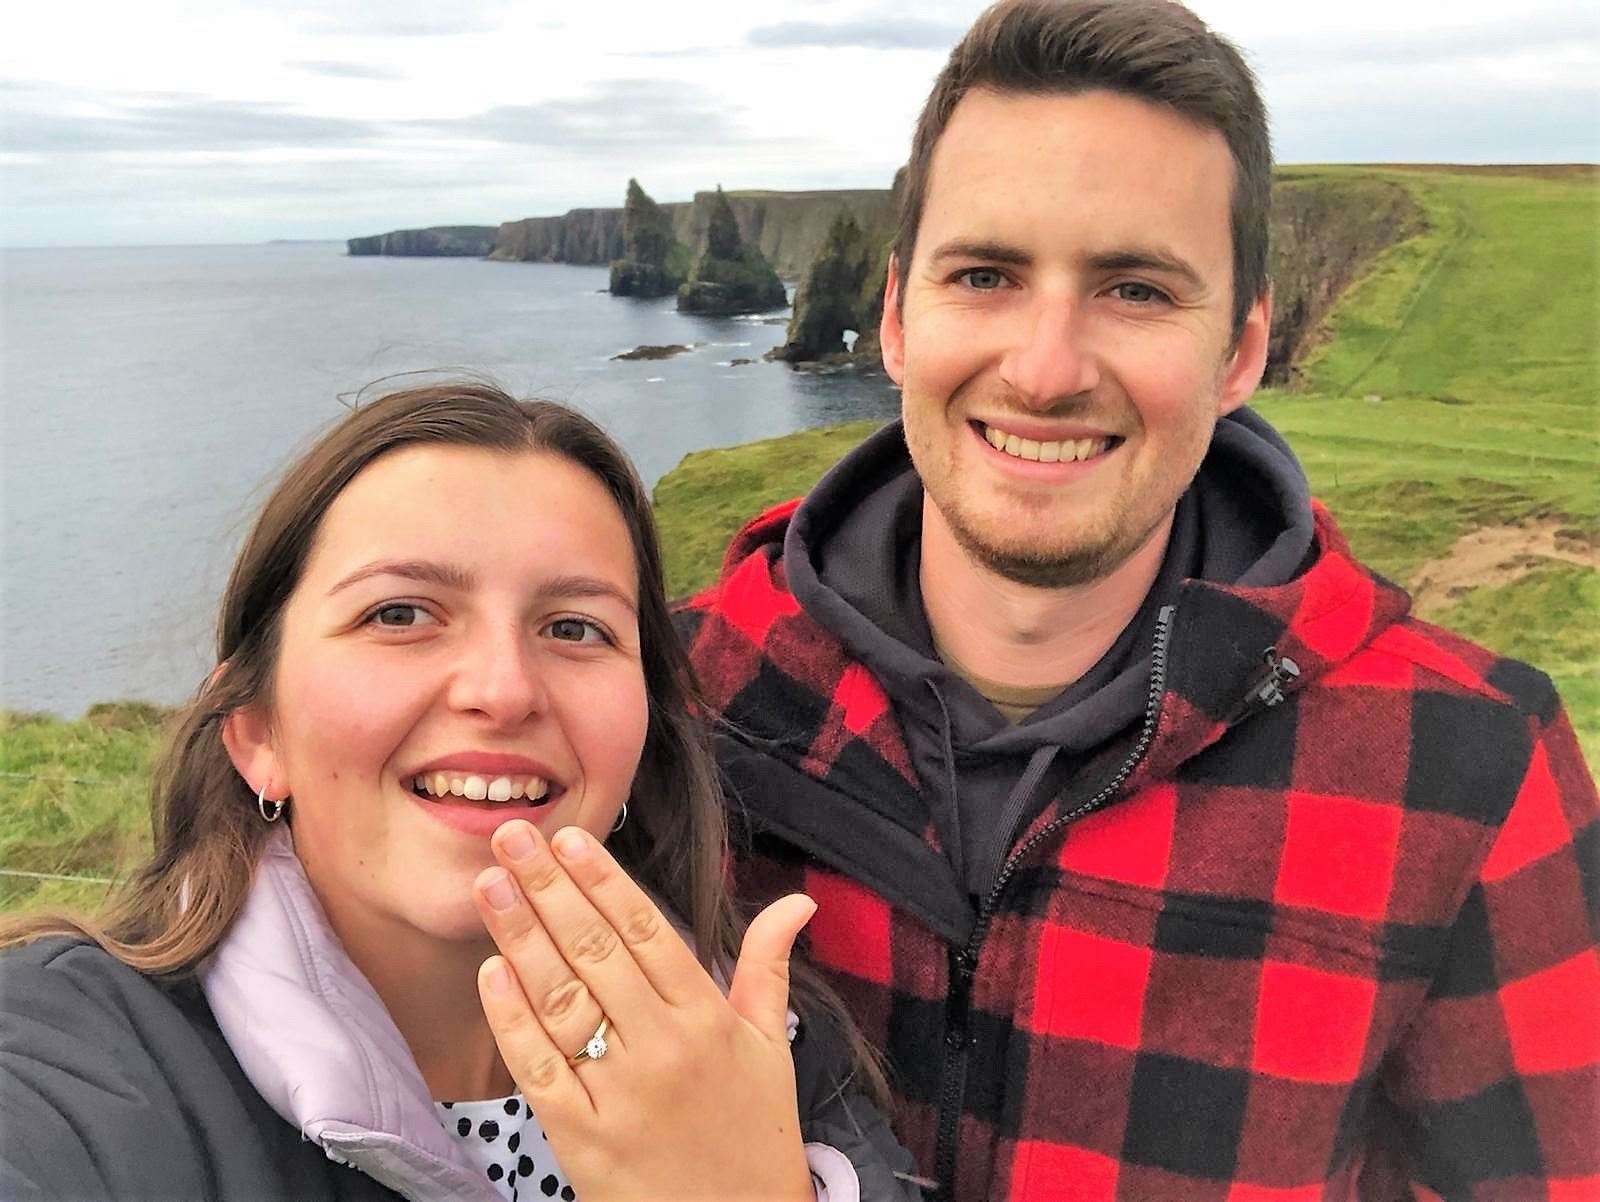 Welsh farming couple Harri Lloyd and Nia Davies took this selfie image seconds after the marriage proposal at Duncansby Stacks.